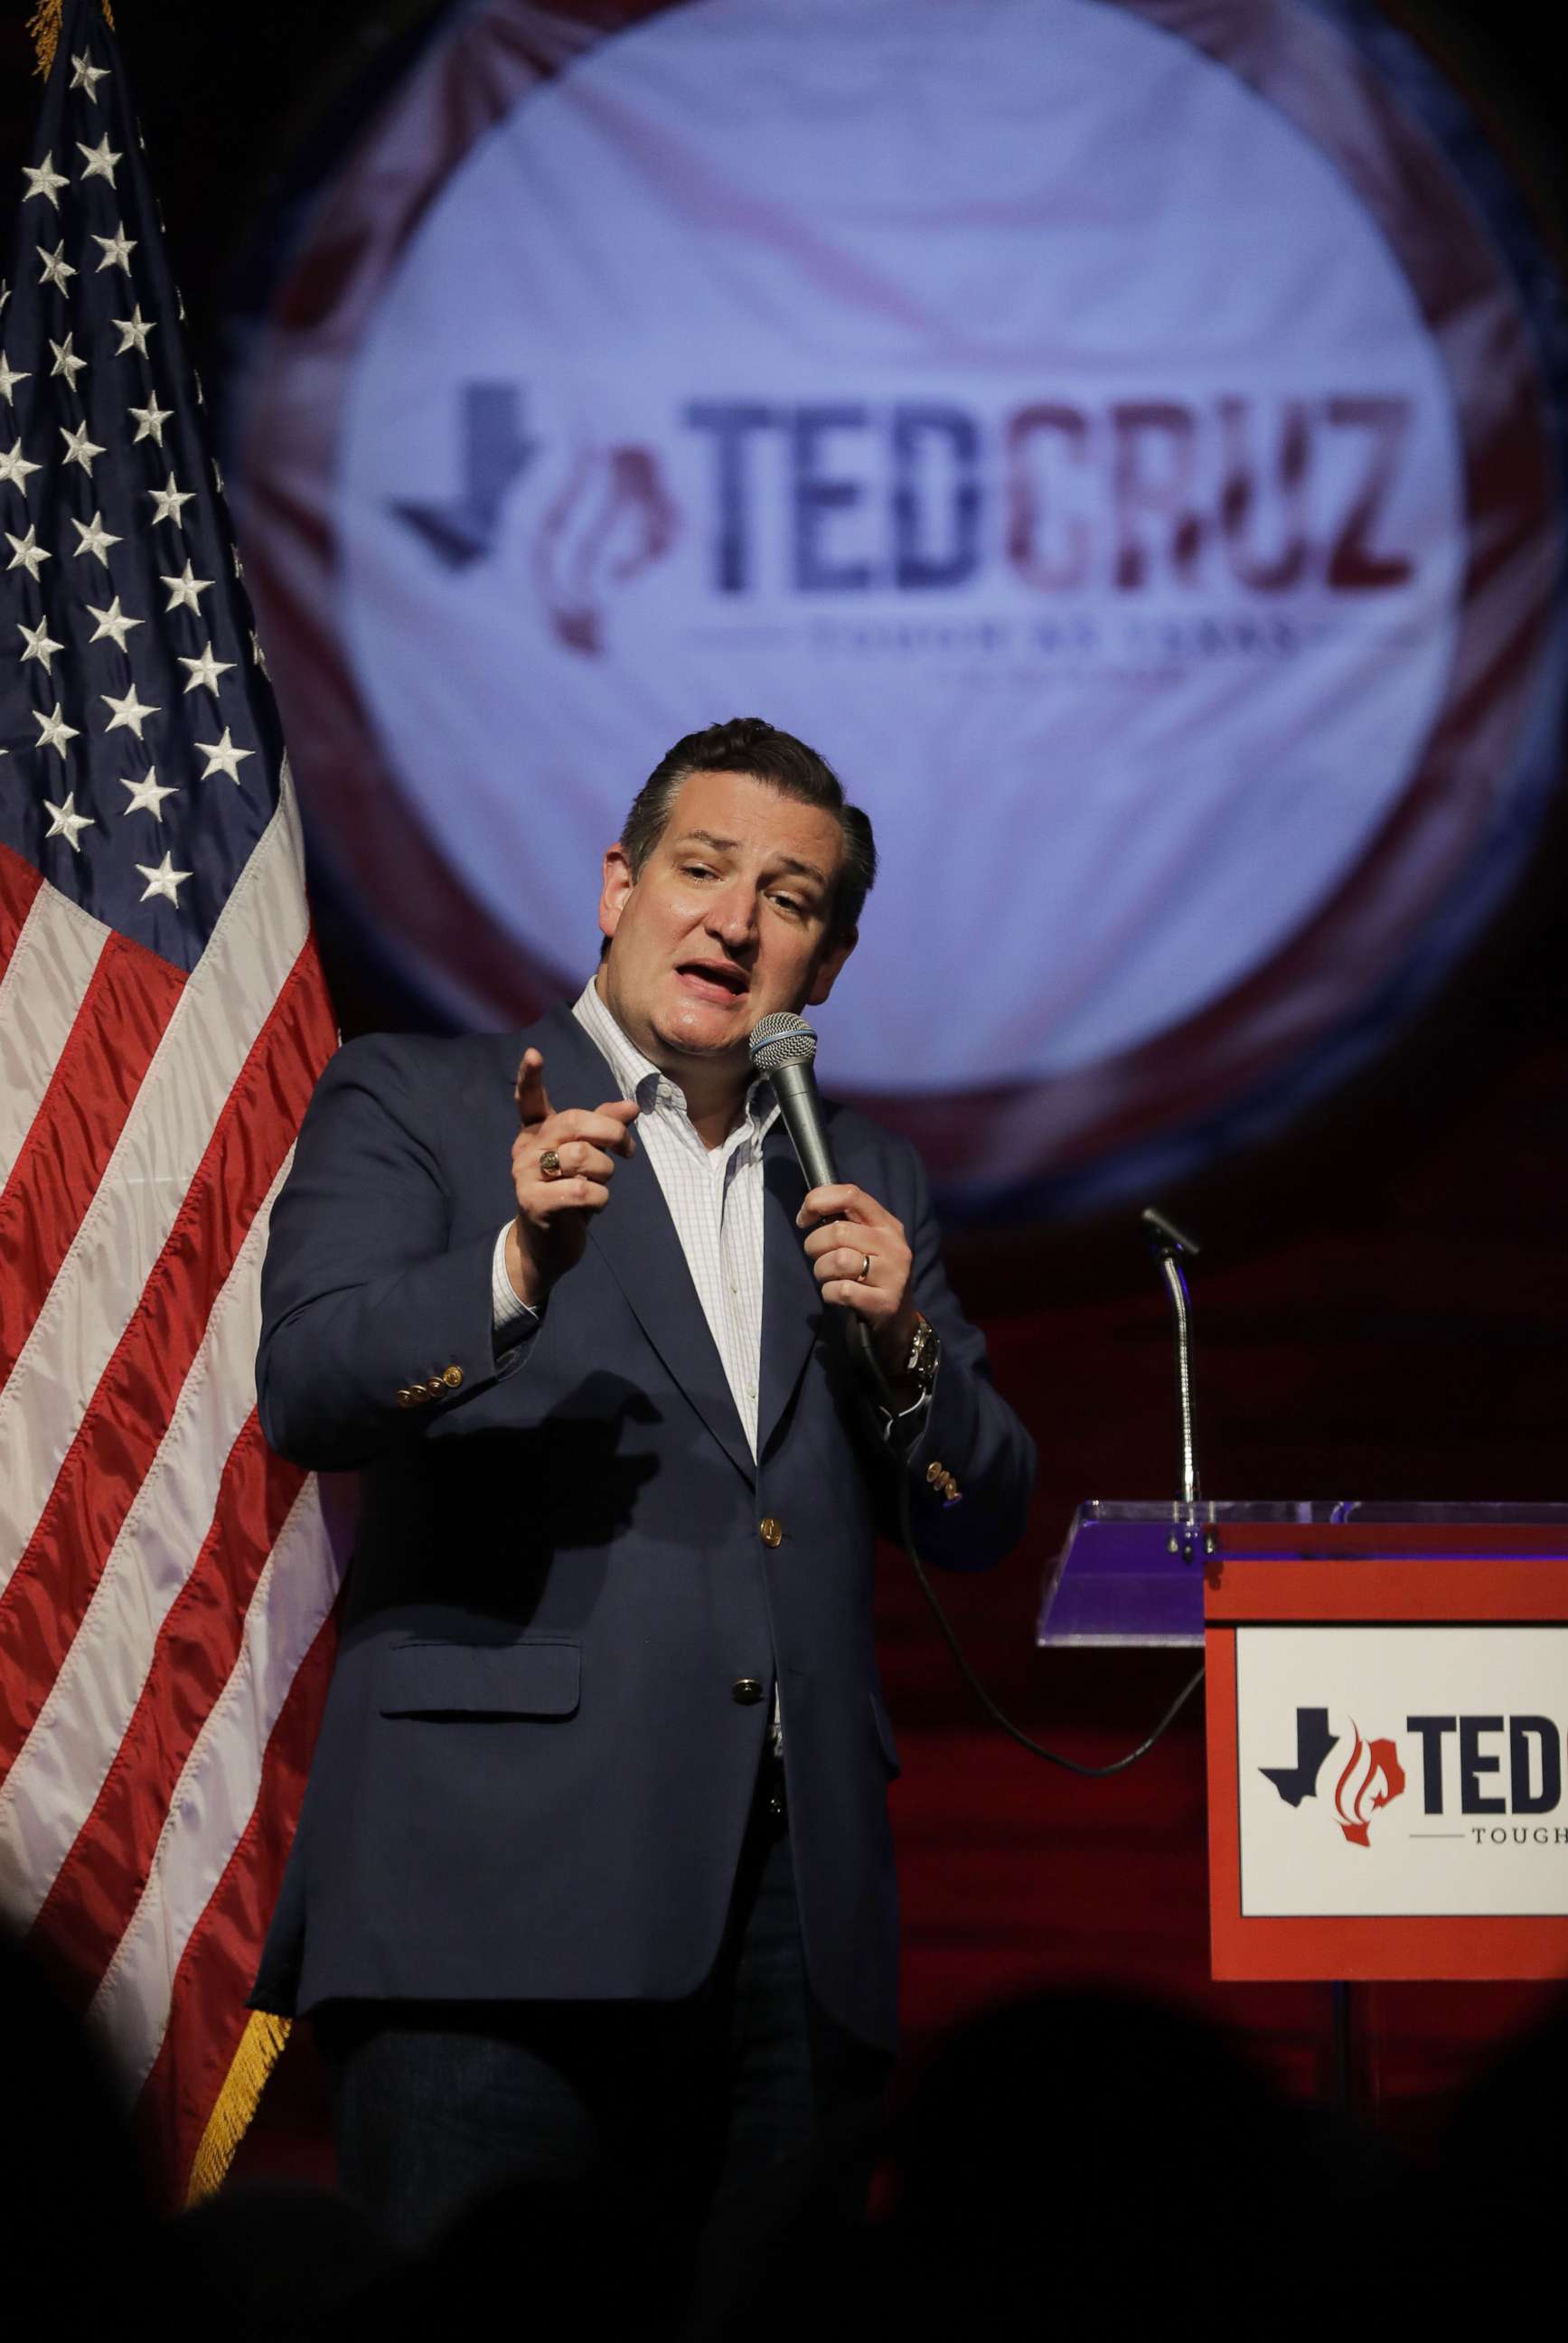 PHOTO: Sen. Ted Cruz speaks during a rally to launch his re-election campaign at the Redneck Country Club on April 2, 2018 in Stafford, Texas.